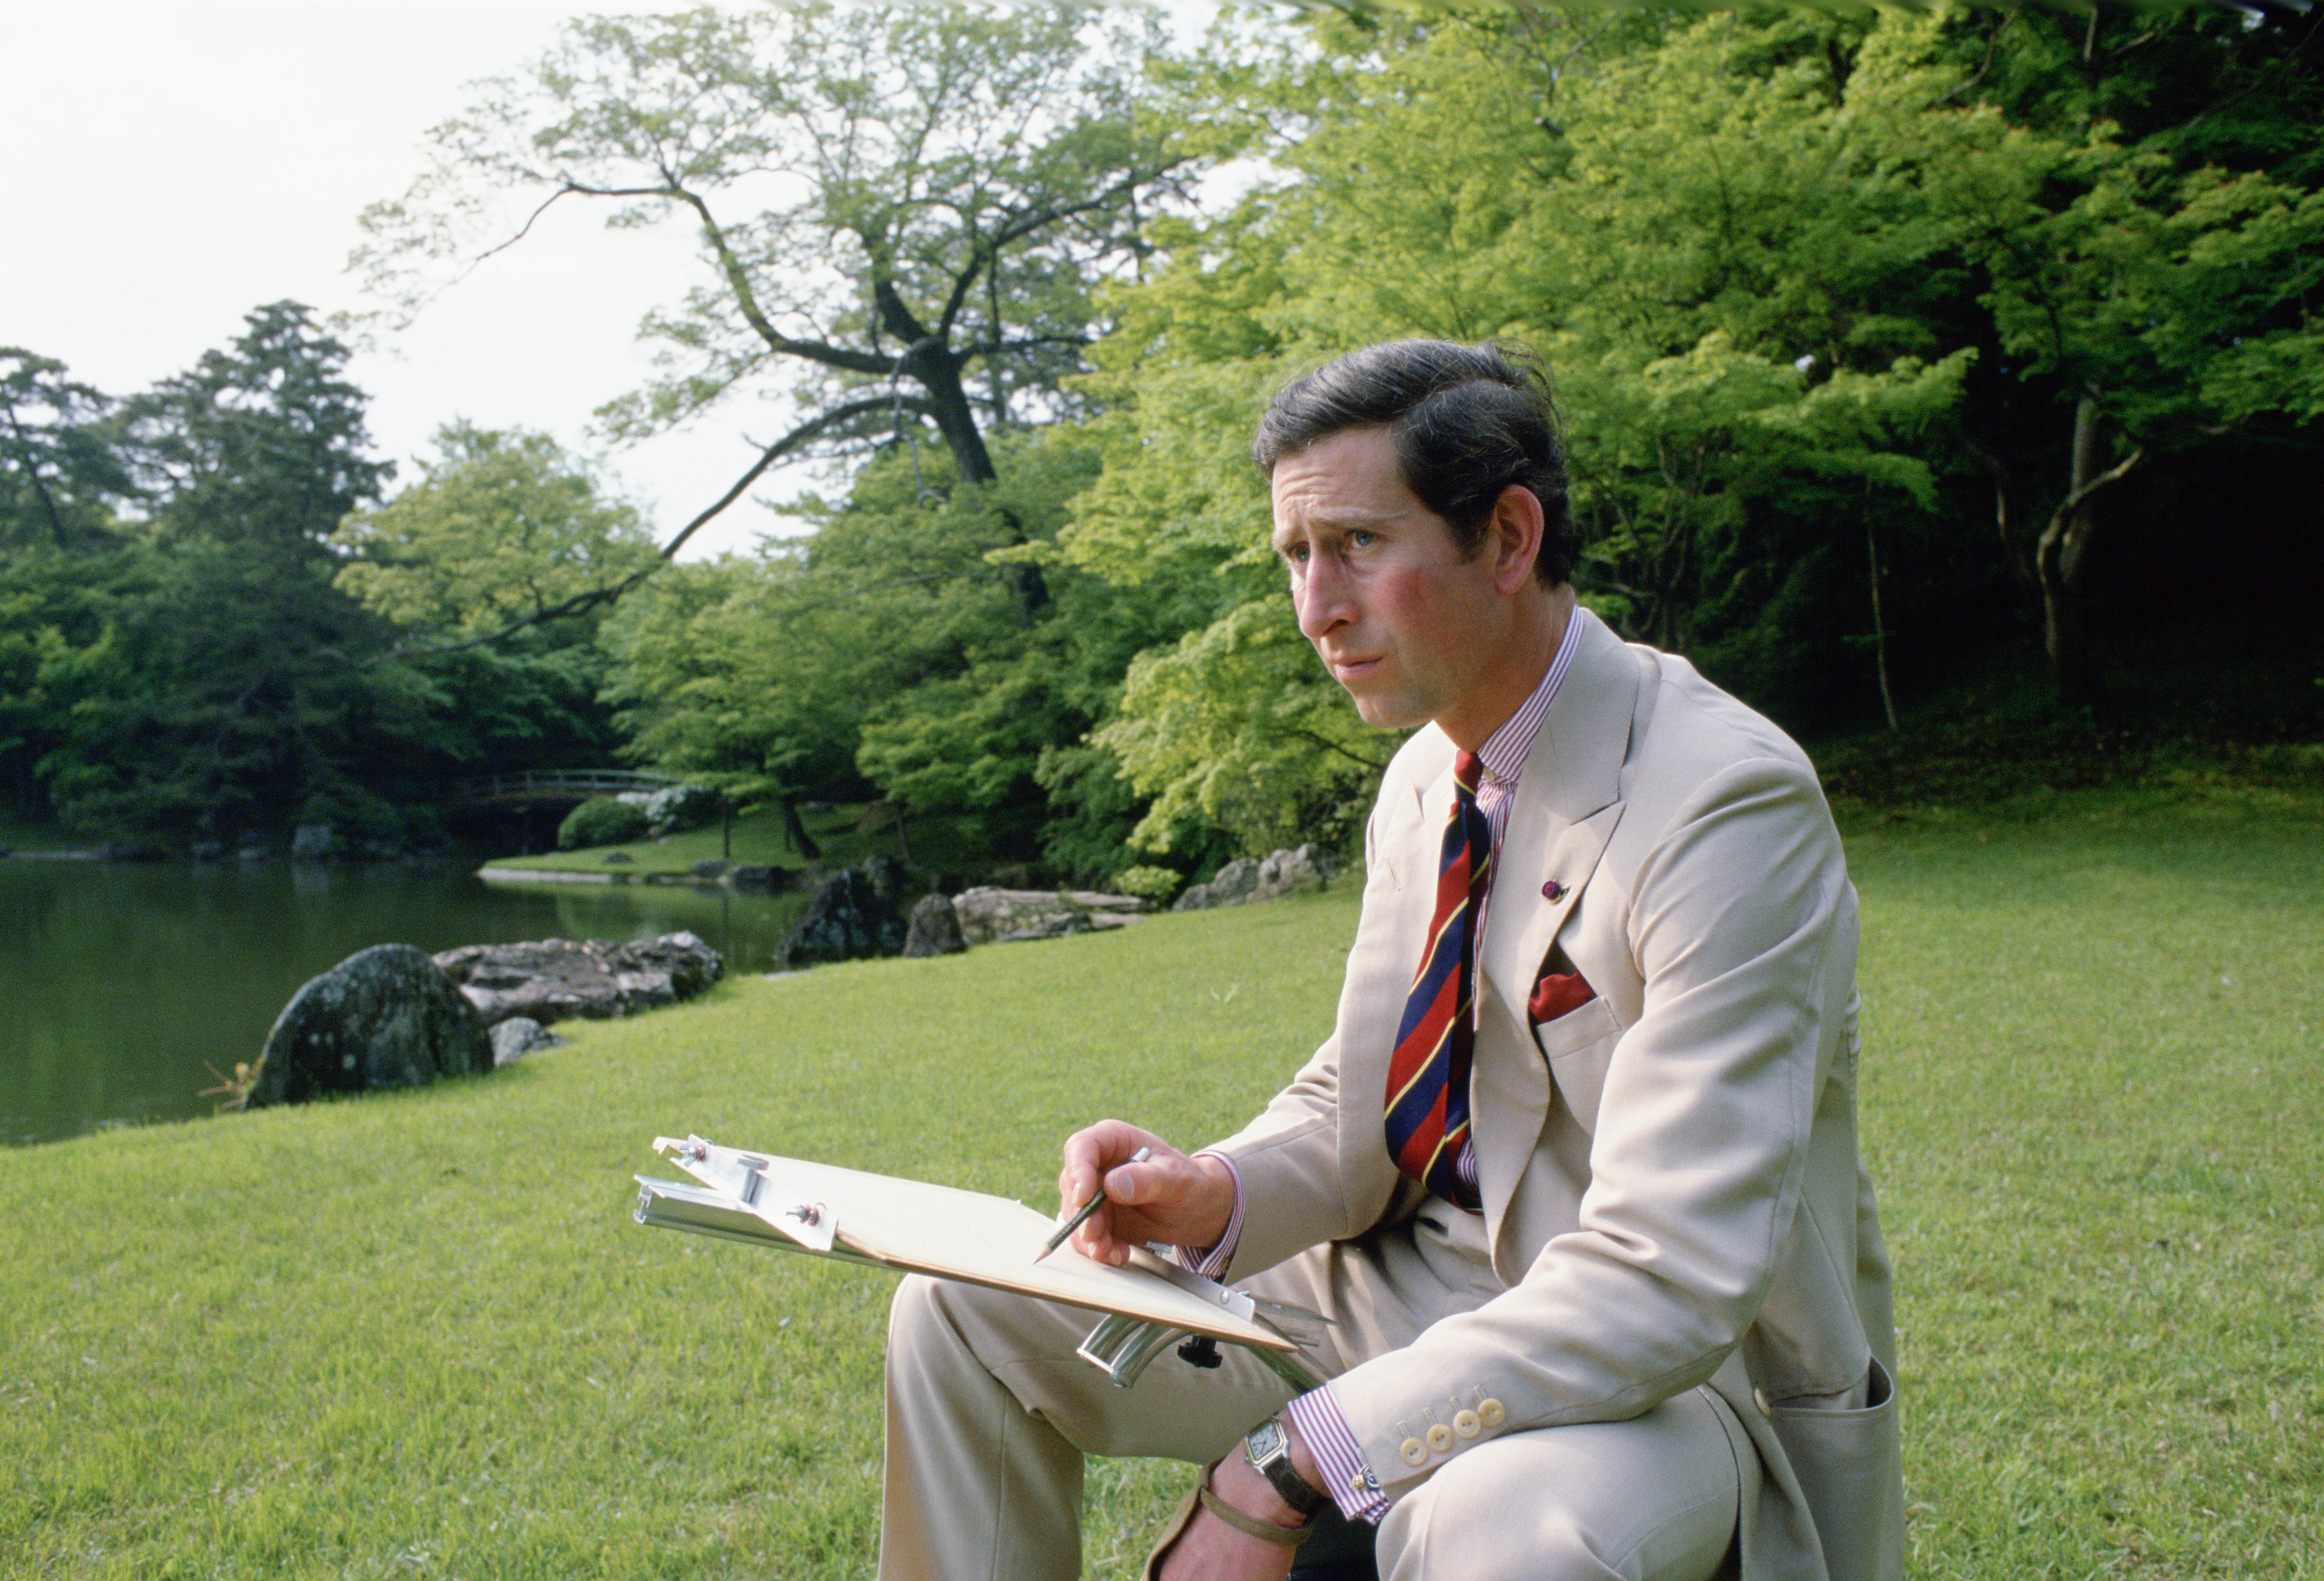 Prince Charles sketching in the gardens of Omiya Palace during a break in his official tour of Japan on May 8, 1986 | Source: Getty Images